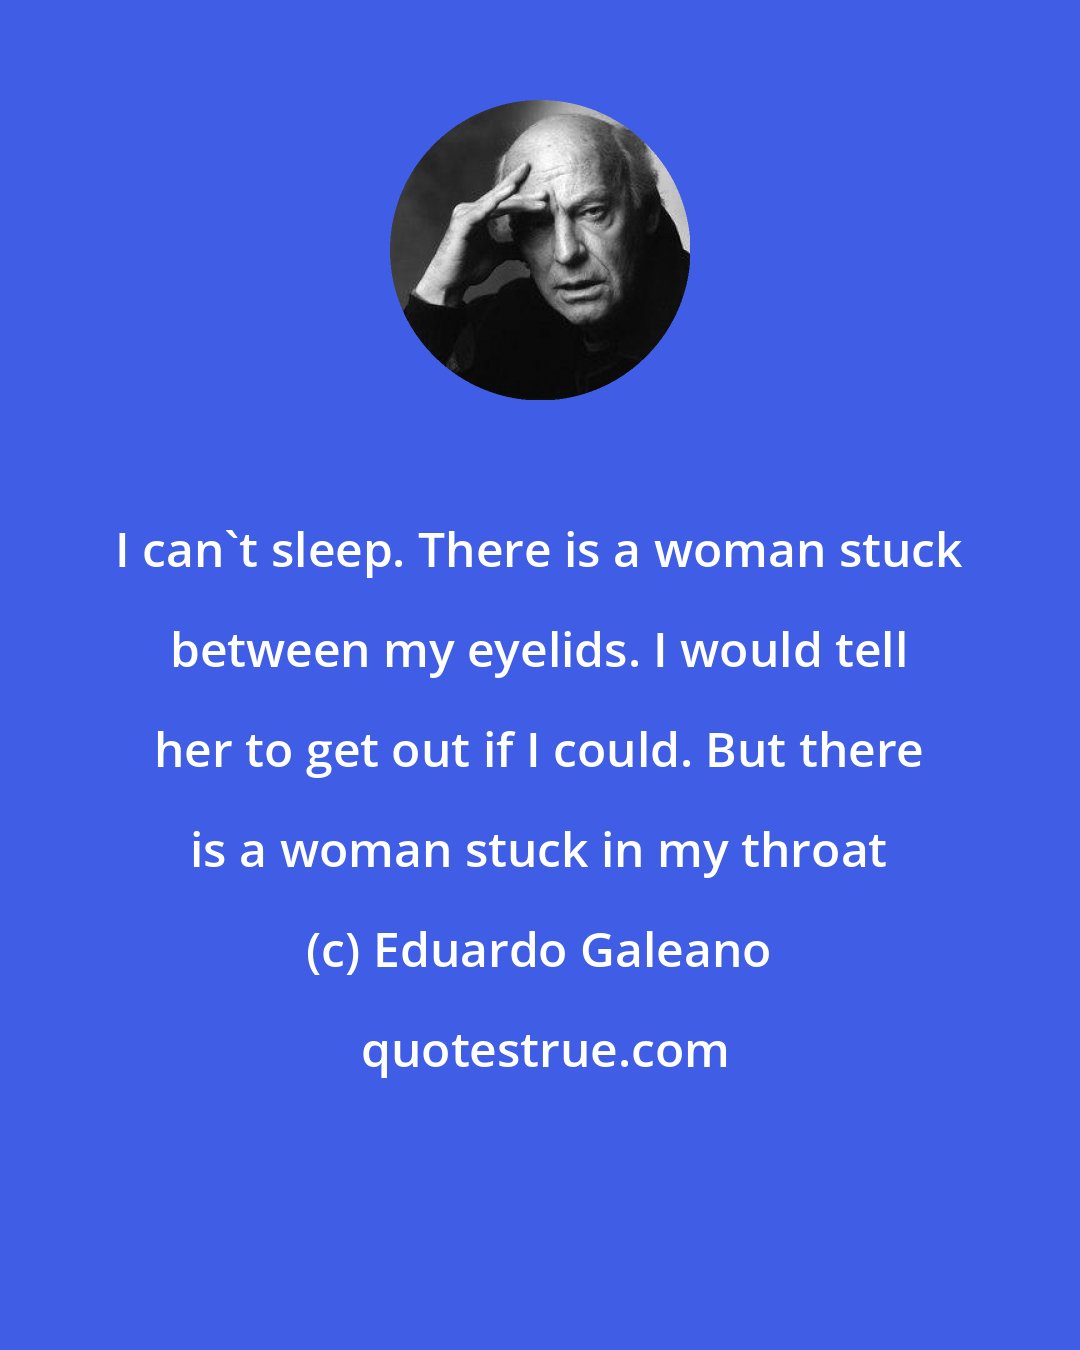 Eduardo Galeano: I can't sleep. There is a woman stuck between my eyelids. I would tell her to get out if I could. But there is a woman stuck in my throat